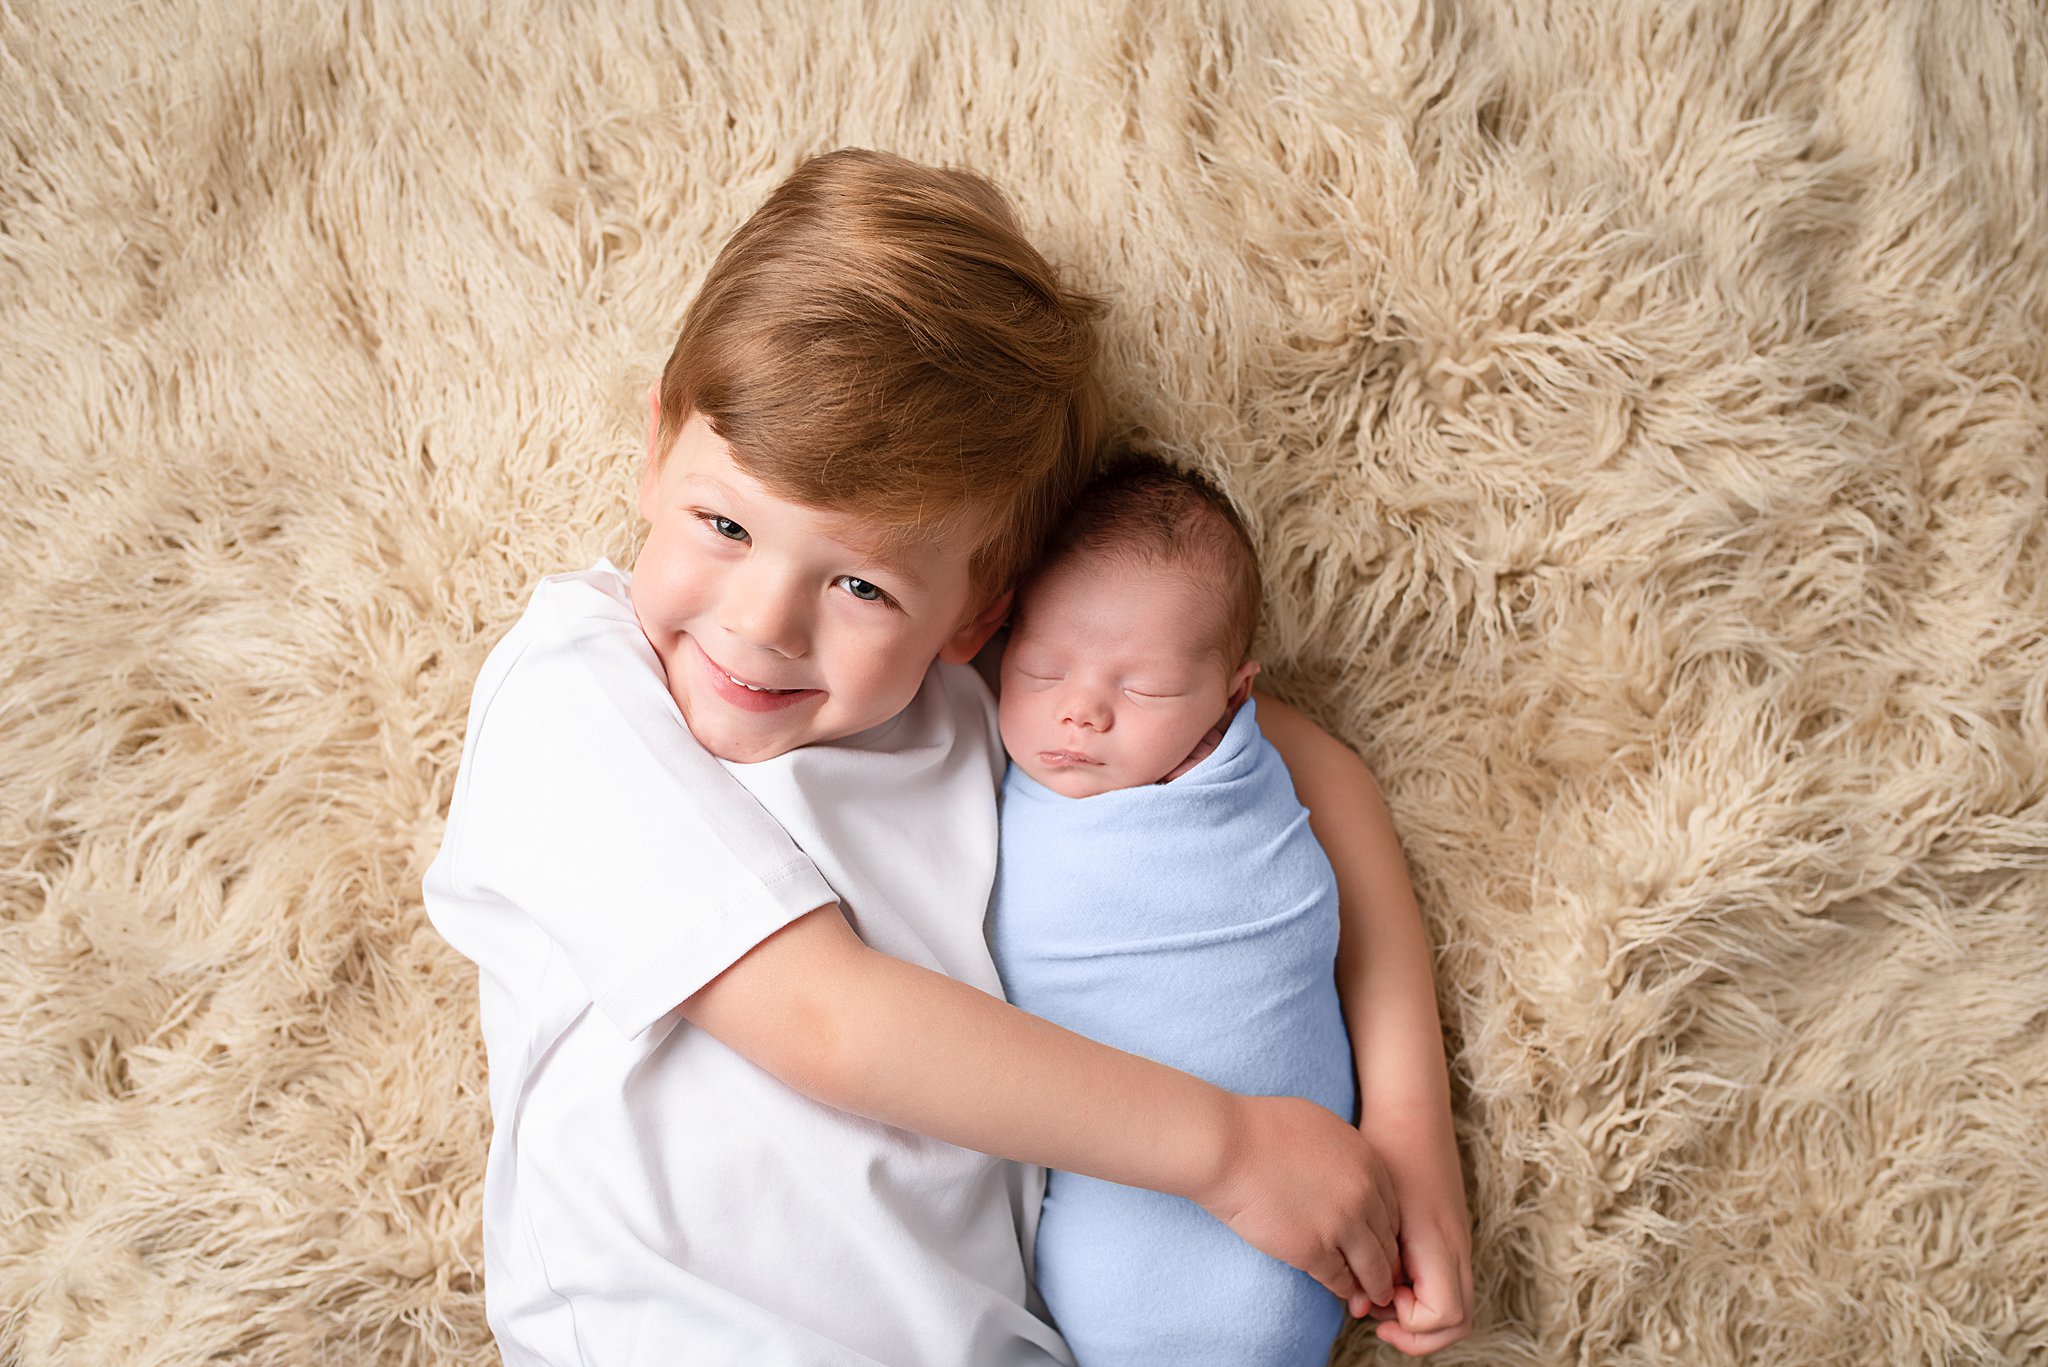 A newborn baby sleeps on a fur blanket in a blue swaddle while being hugged by his older brother